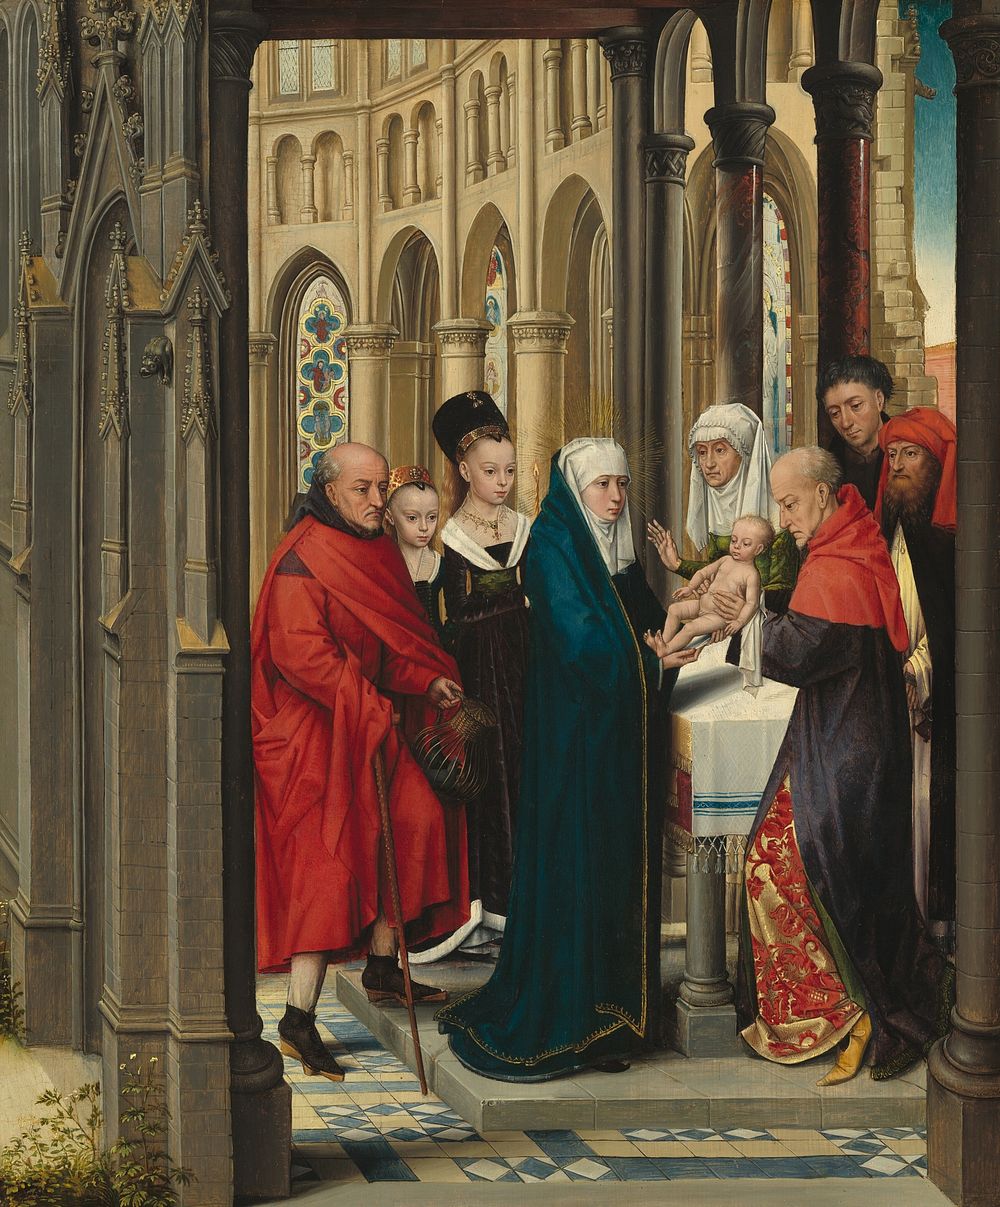 The Presentation in the Temple (ca. 1470&ndash;1480) by Master of the Prado "Adoration of the Magi".  